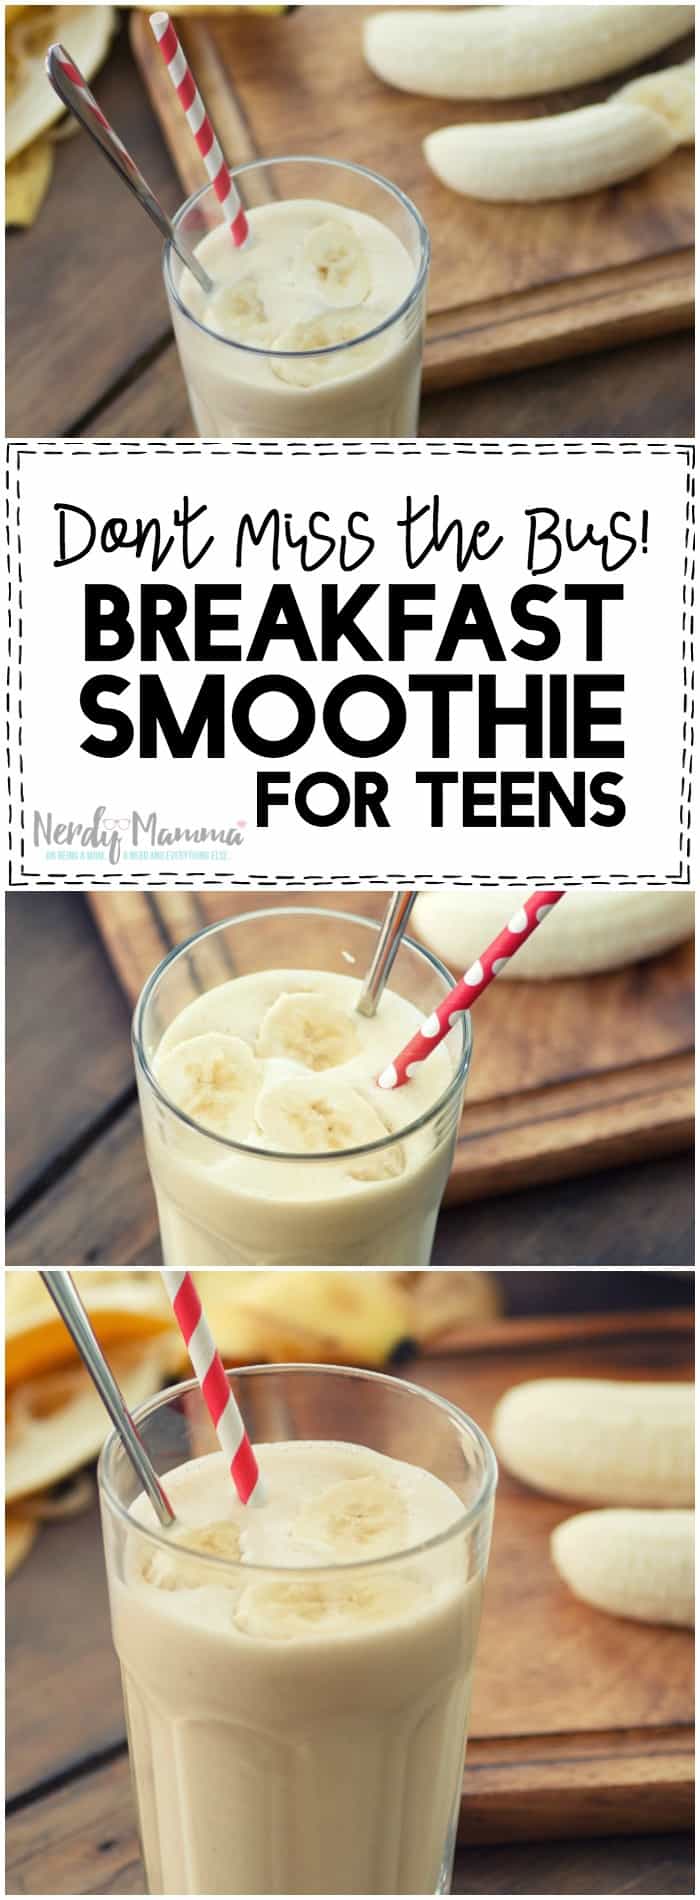 This breakfast smoothie for teens is so easy! I love it!